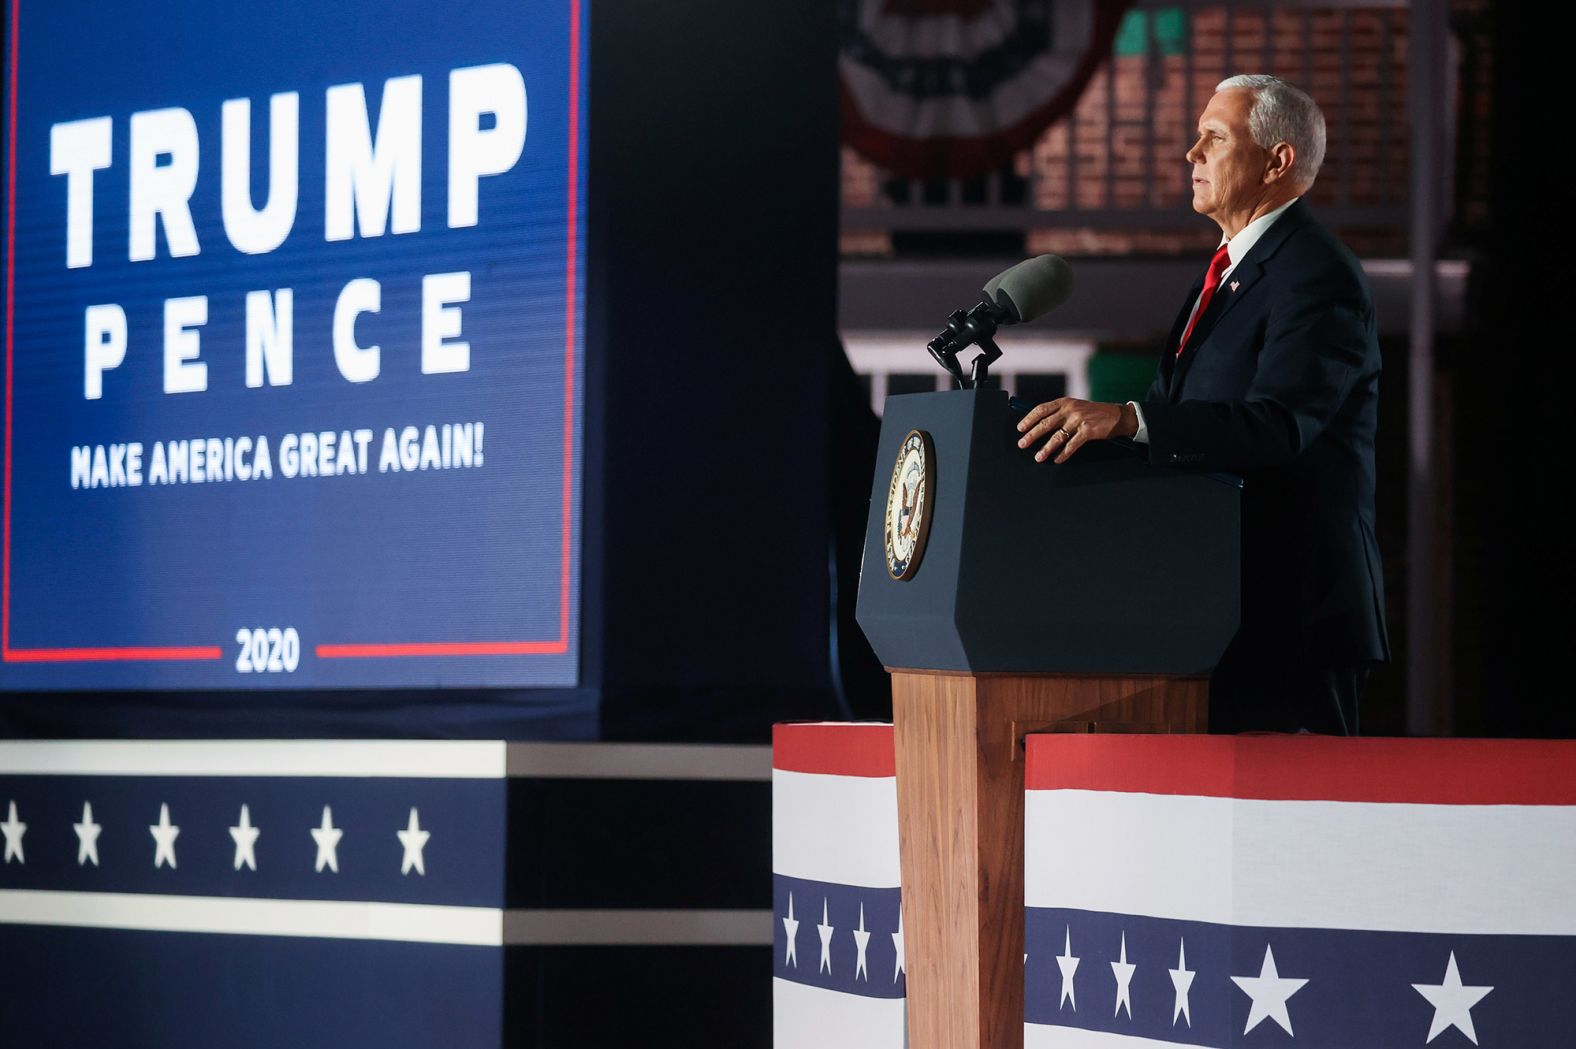 Pence used a portion of his remarks <a href="https://www.cnn.com/politics/live-news/rnc-2020-day-3/h_0591184c0cd7092d7536dffefbeba833" target="_blank">to deliver a pro-police "law and order" message.</a> "Let me be clear: the violence must stop, whether in Minneapolis, Portland, or Kenosha." He said he and Trump "will always support the right of Americans to peaceful protest, but rioting and looting is not peaceful protest. Tearing down statues is not free speech. Those who do so will be prosecuted to the fullest extent of the law."